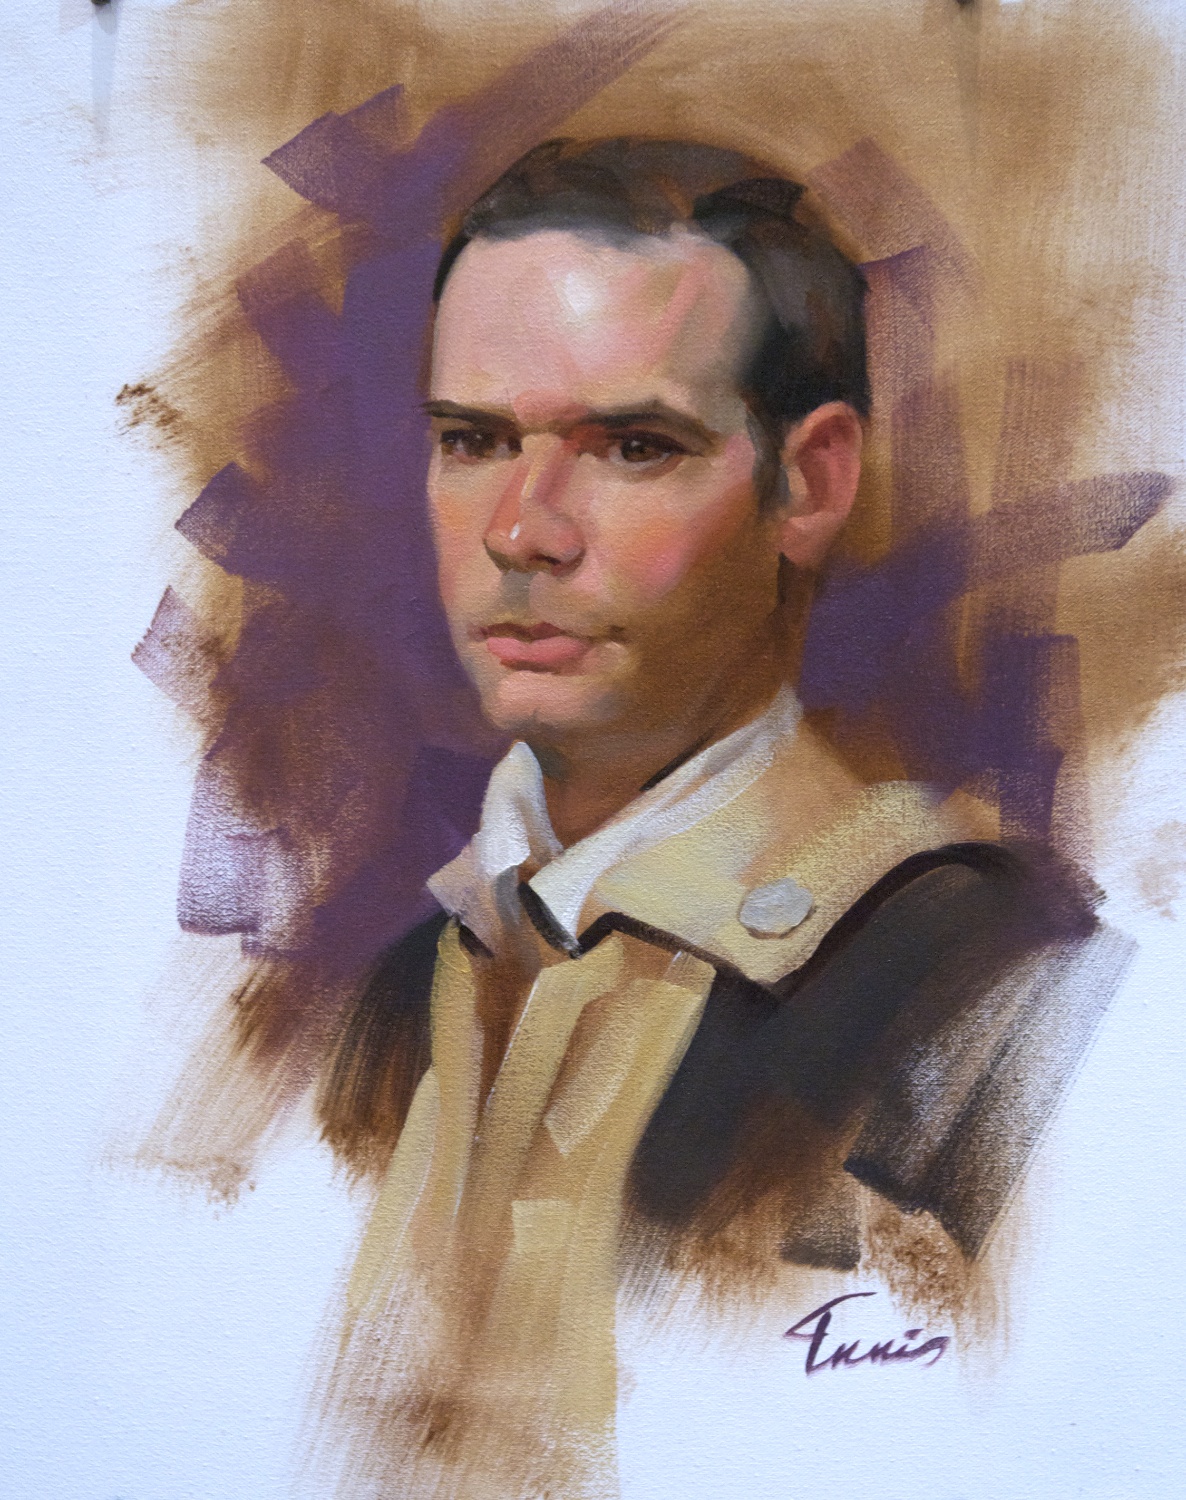 Live demo for the Portrait Society of America Conference